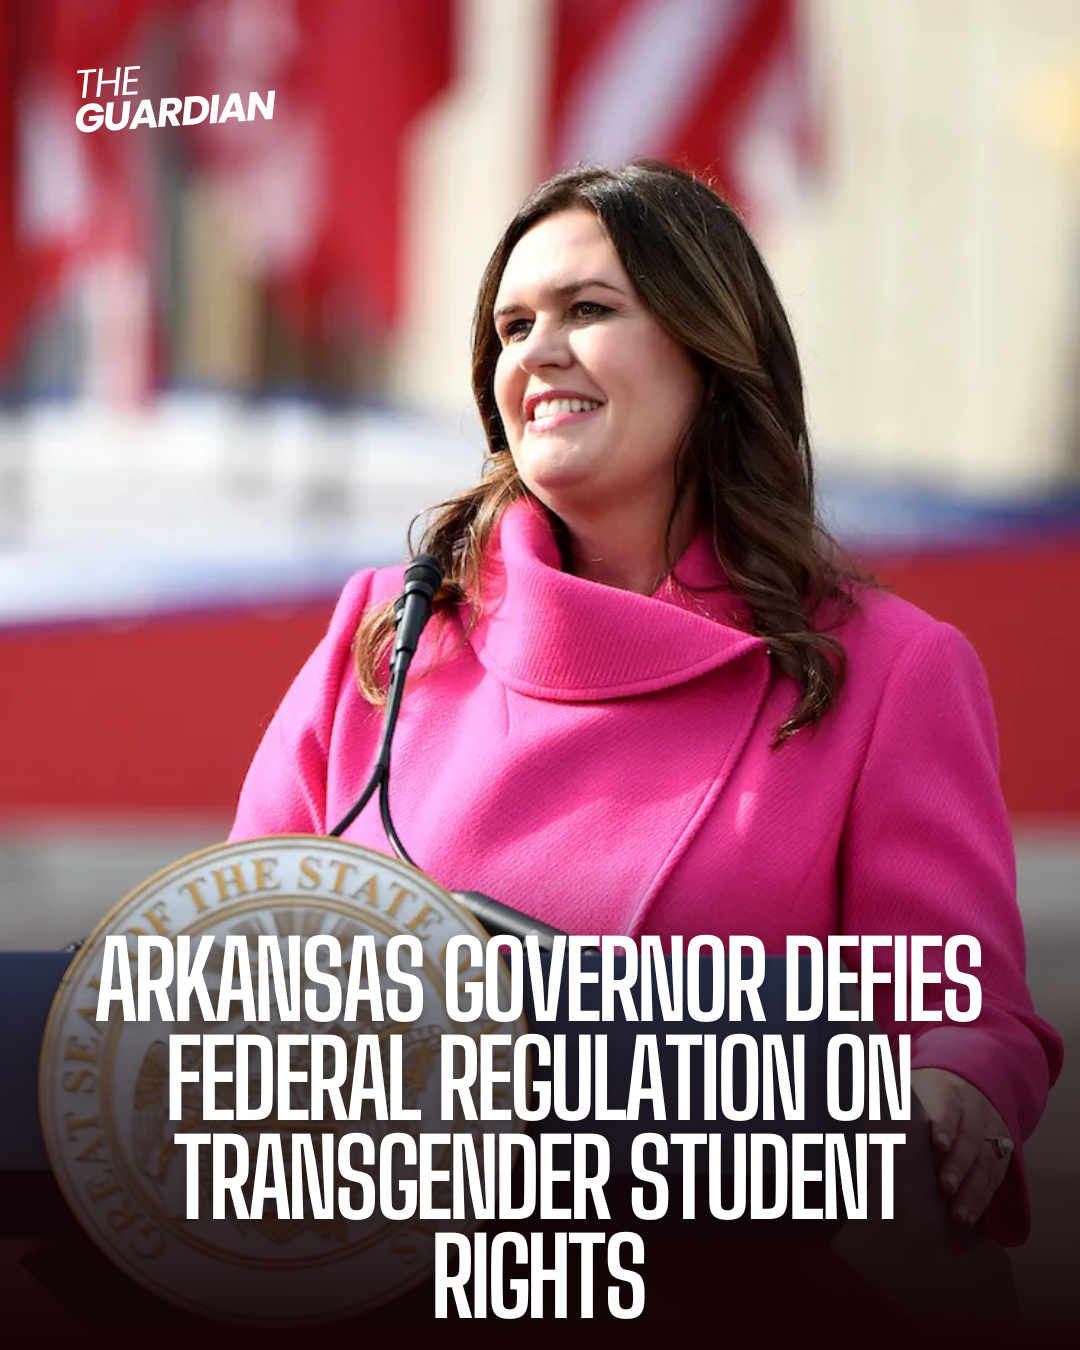 Arkansas Governor Sarah Huckabee Sanders issued an executive order stating her refusal to comply with new federal rules.